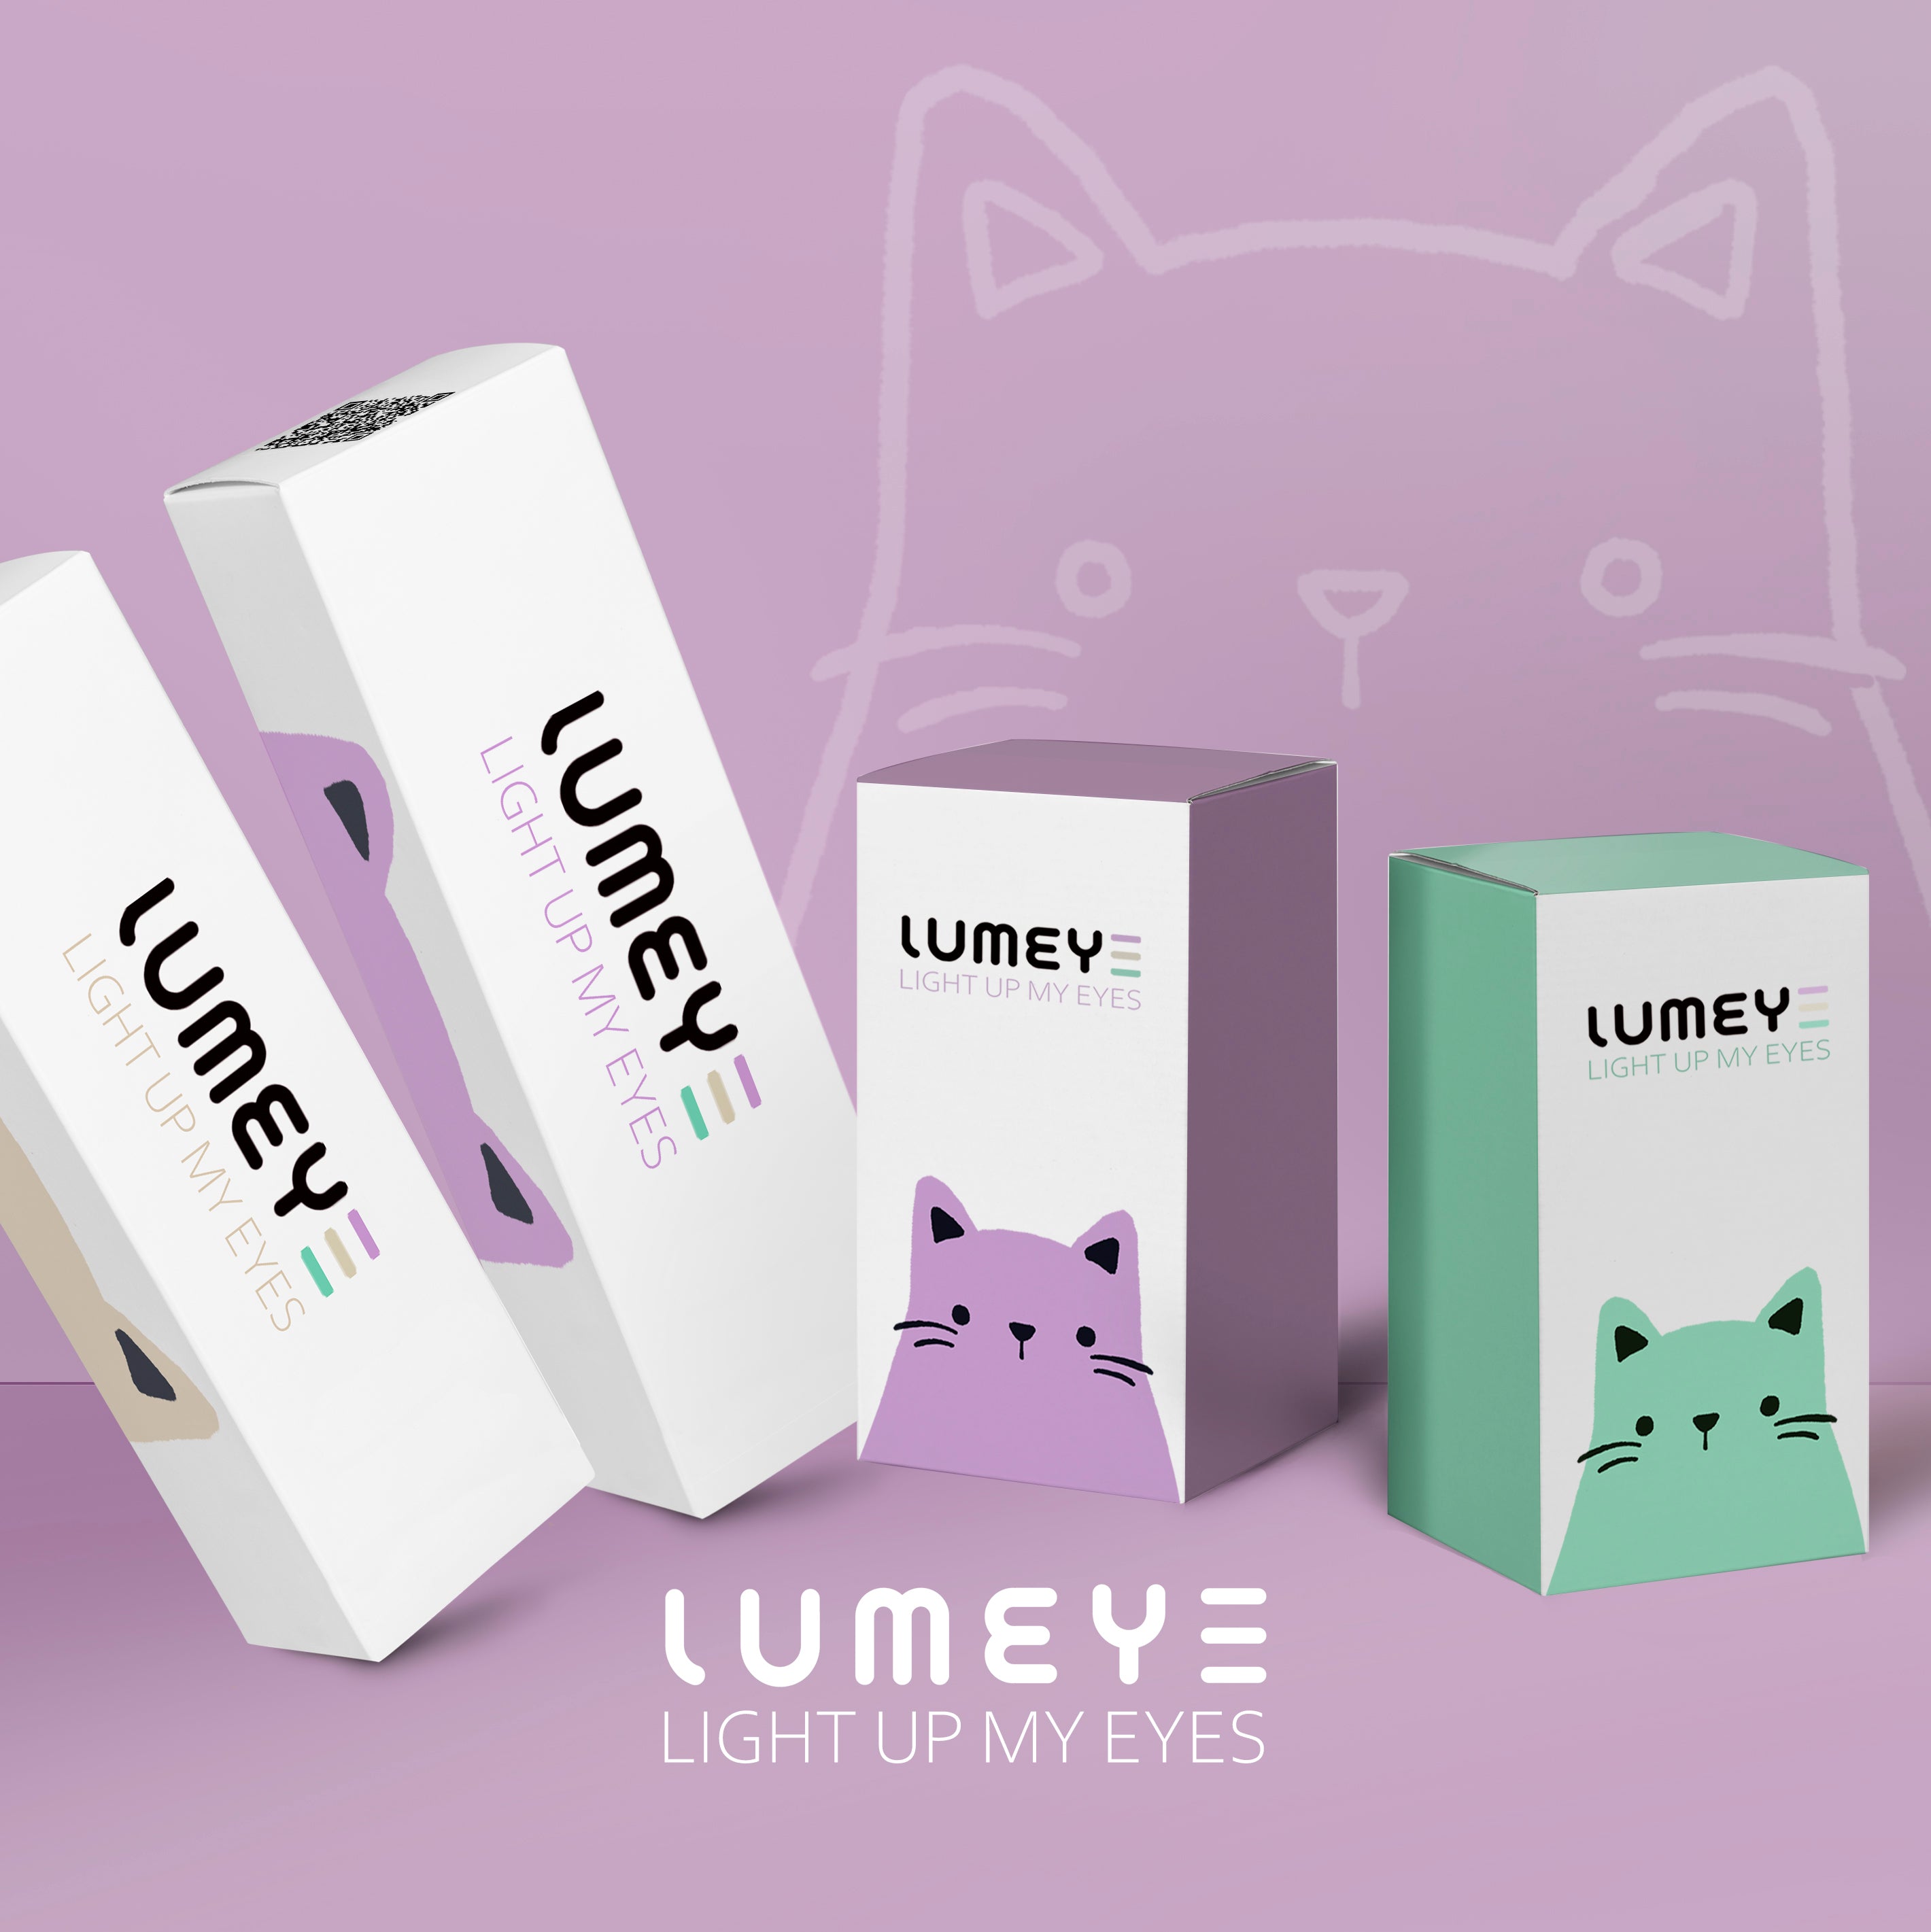 Best COLORED CONTACTS - LUMEYE Ice Crack Gray Colored Contact Lenses - LUMEYE